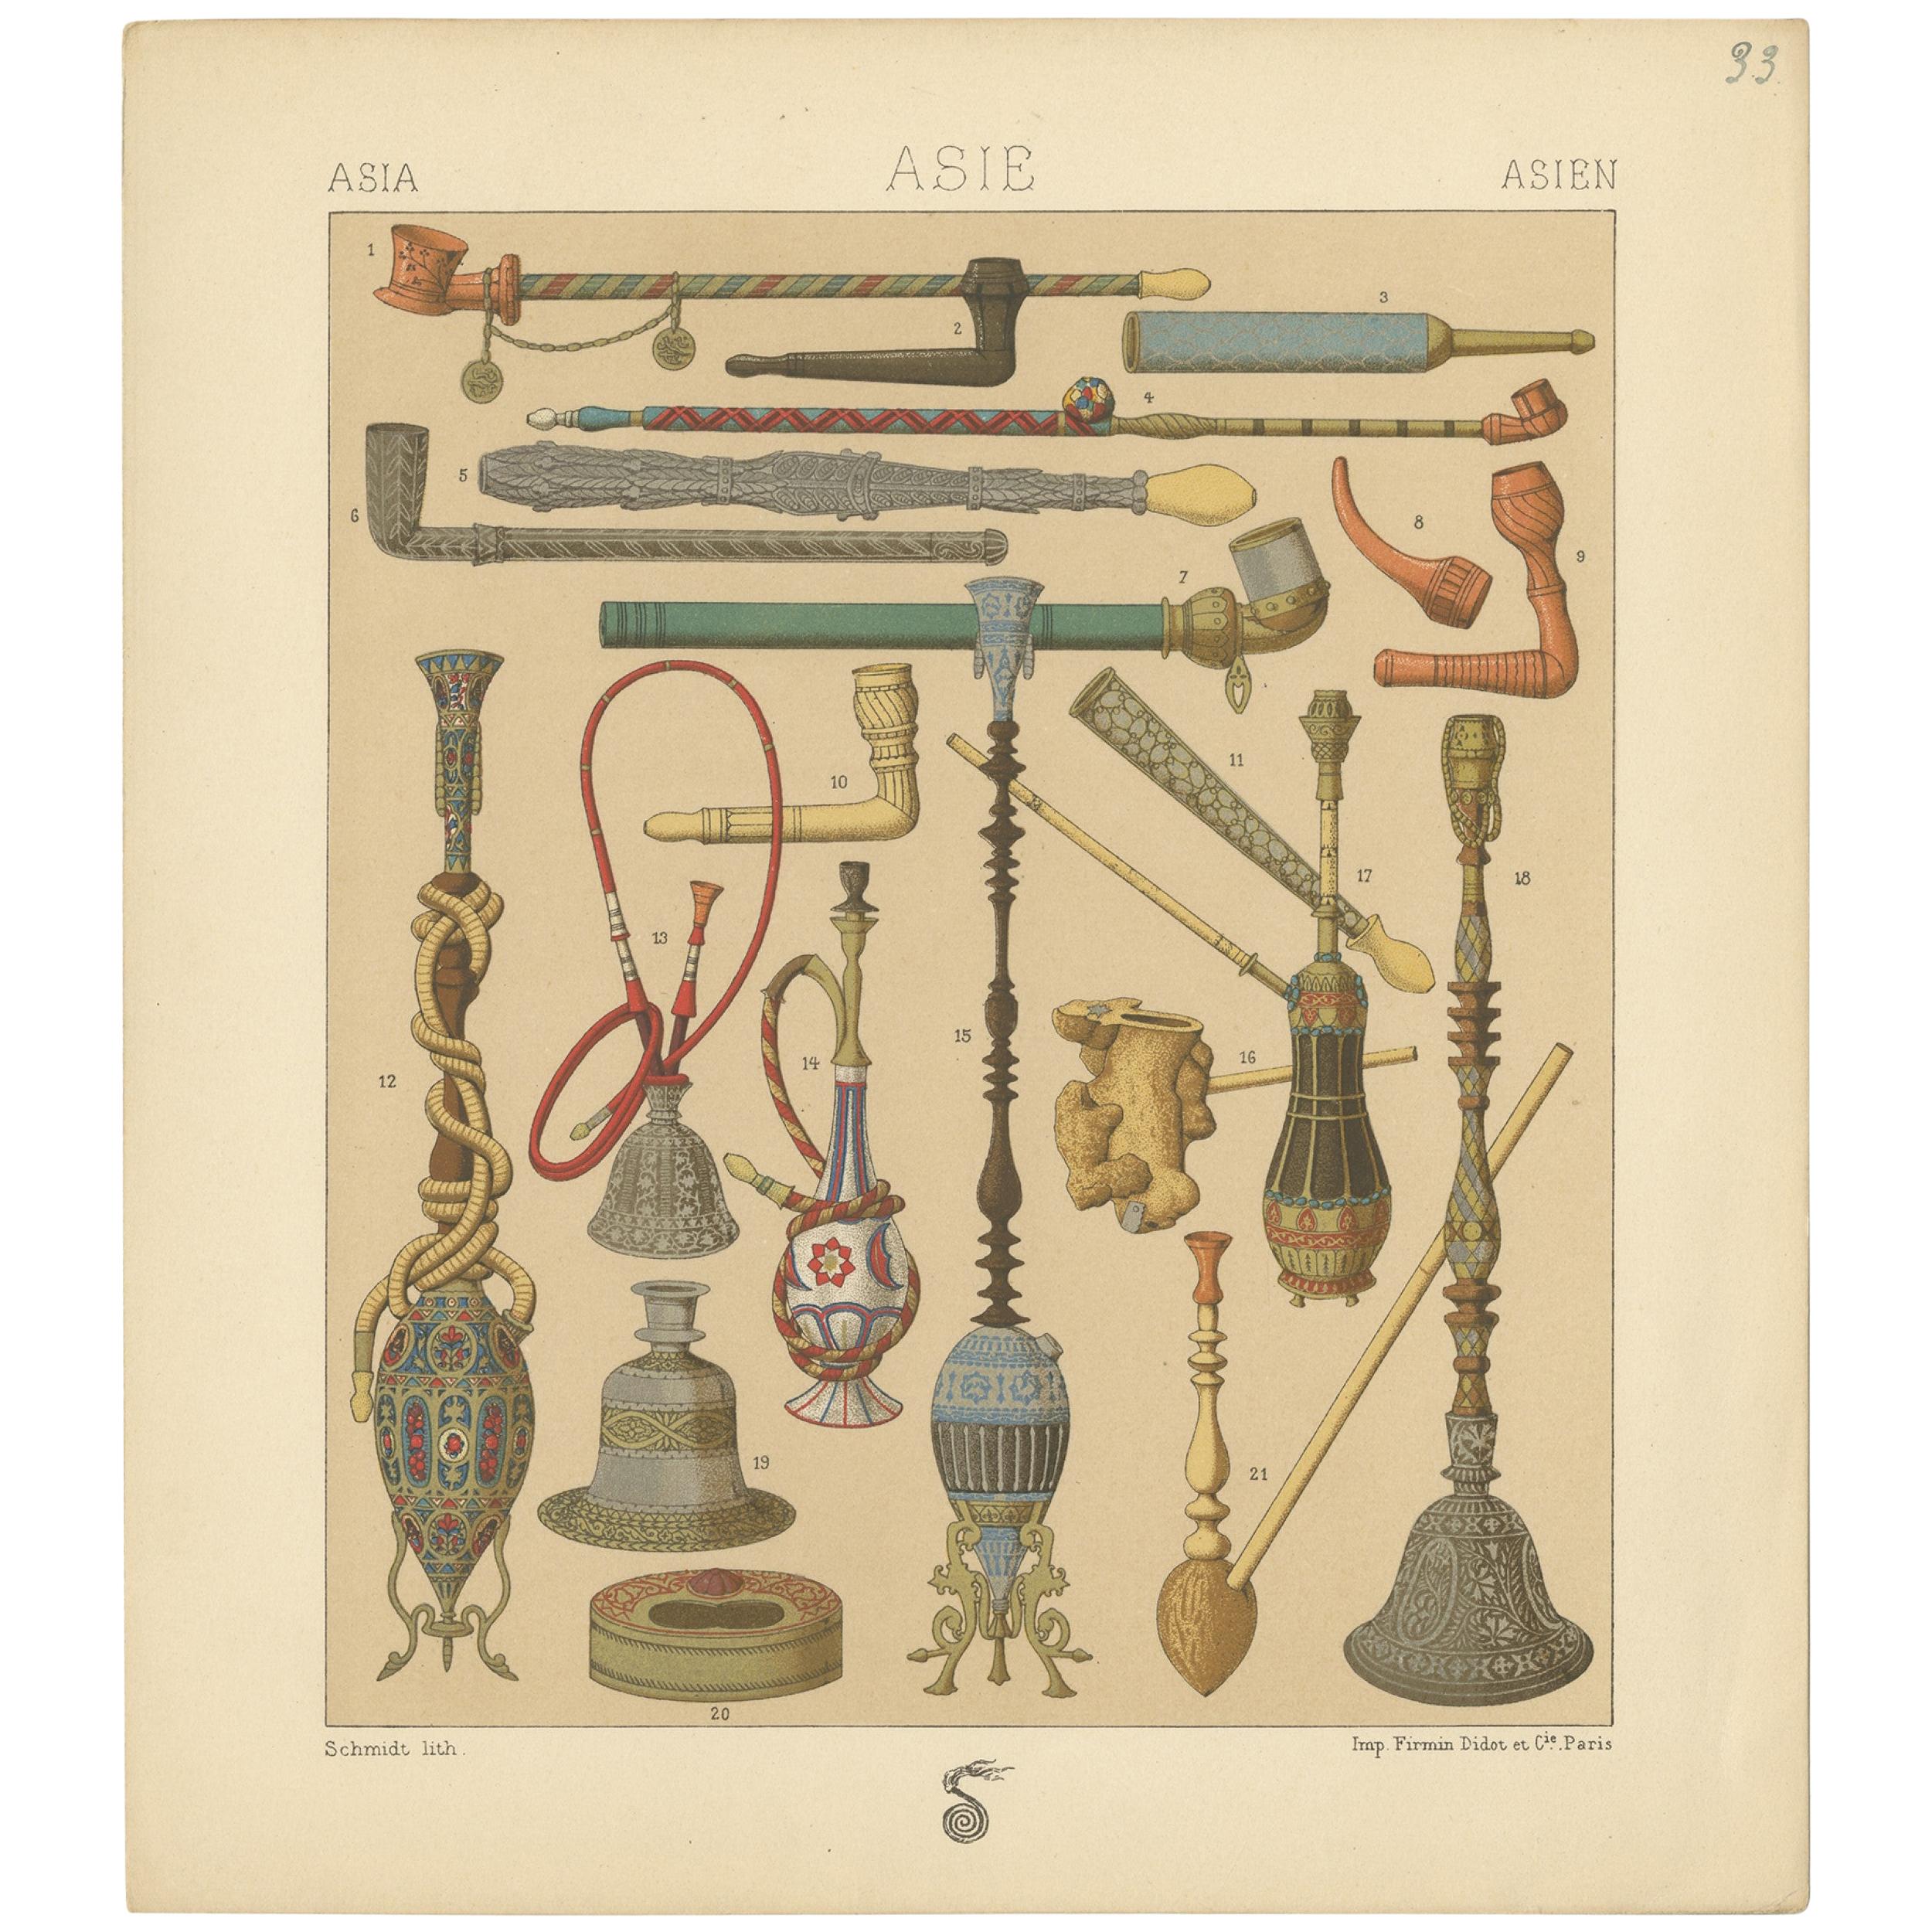 Pl. 33 Antique Print of Asian Smoking Pipes by Racinet, 'circa 1880'